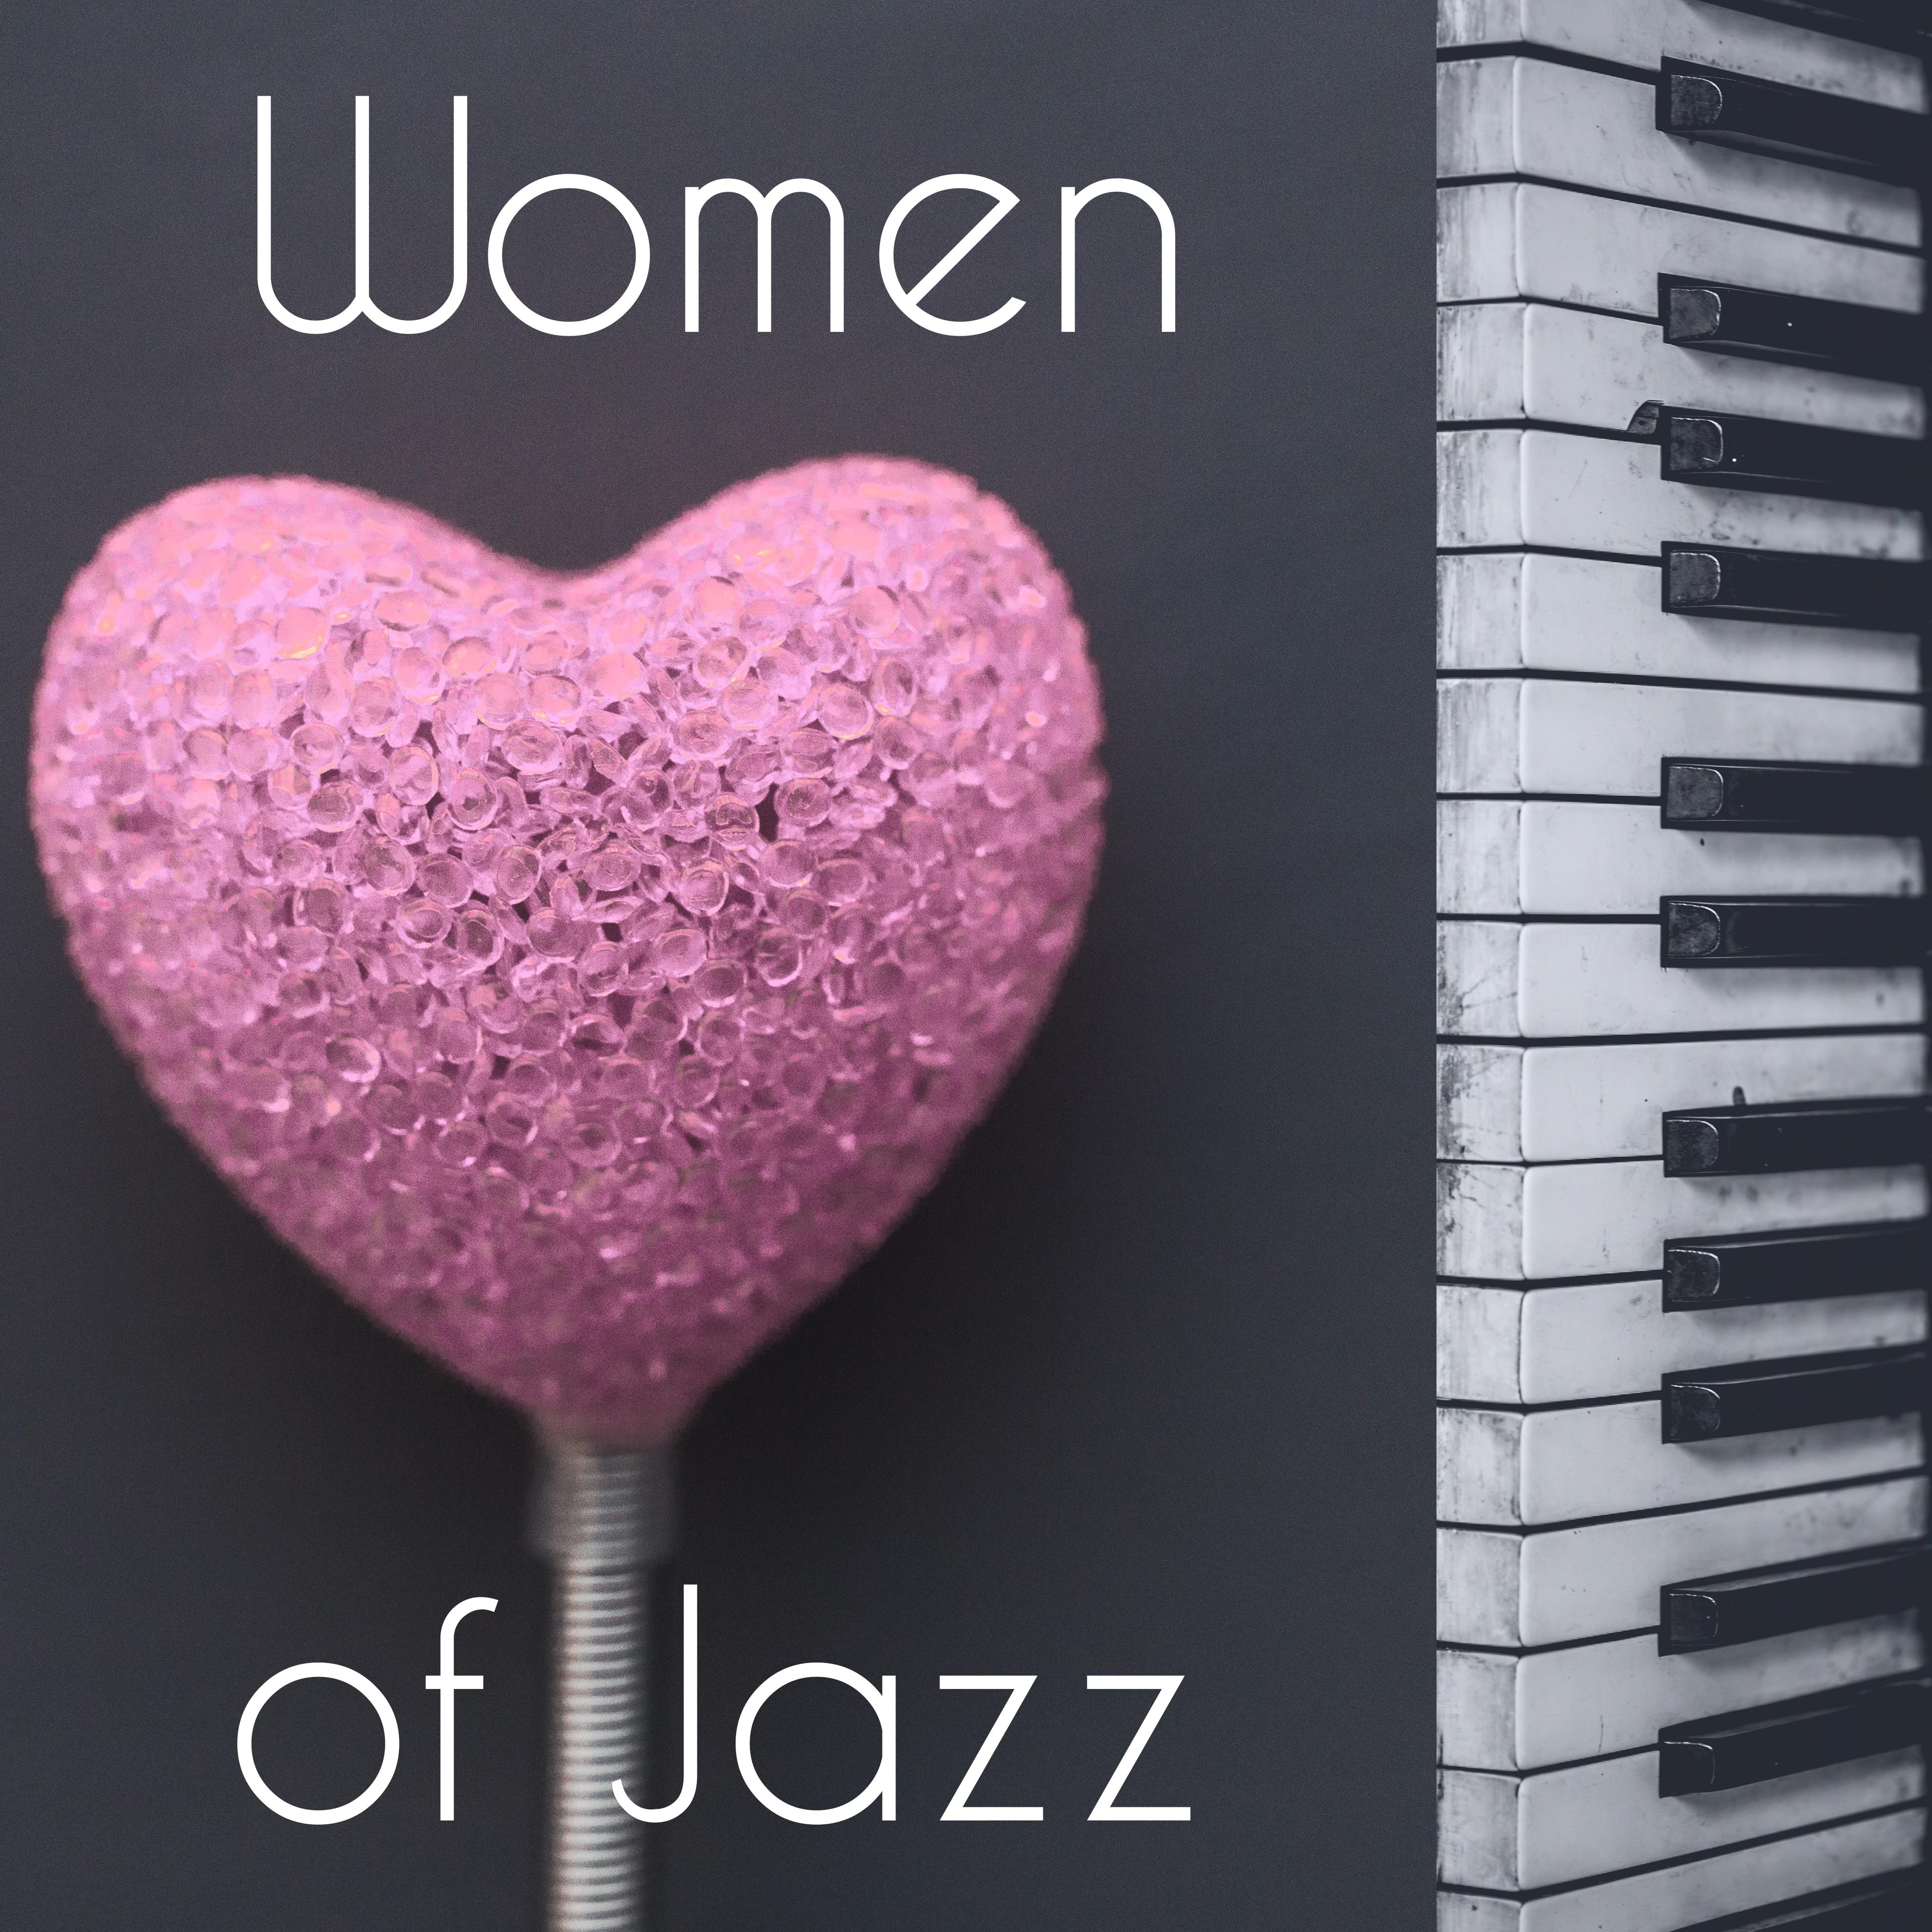 Women of Jazz  Soothing Jazz Music, Ambient Solo Piano is the Best Background Music to Restaurant  Cafe